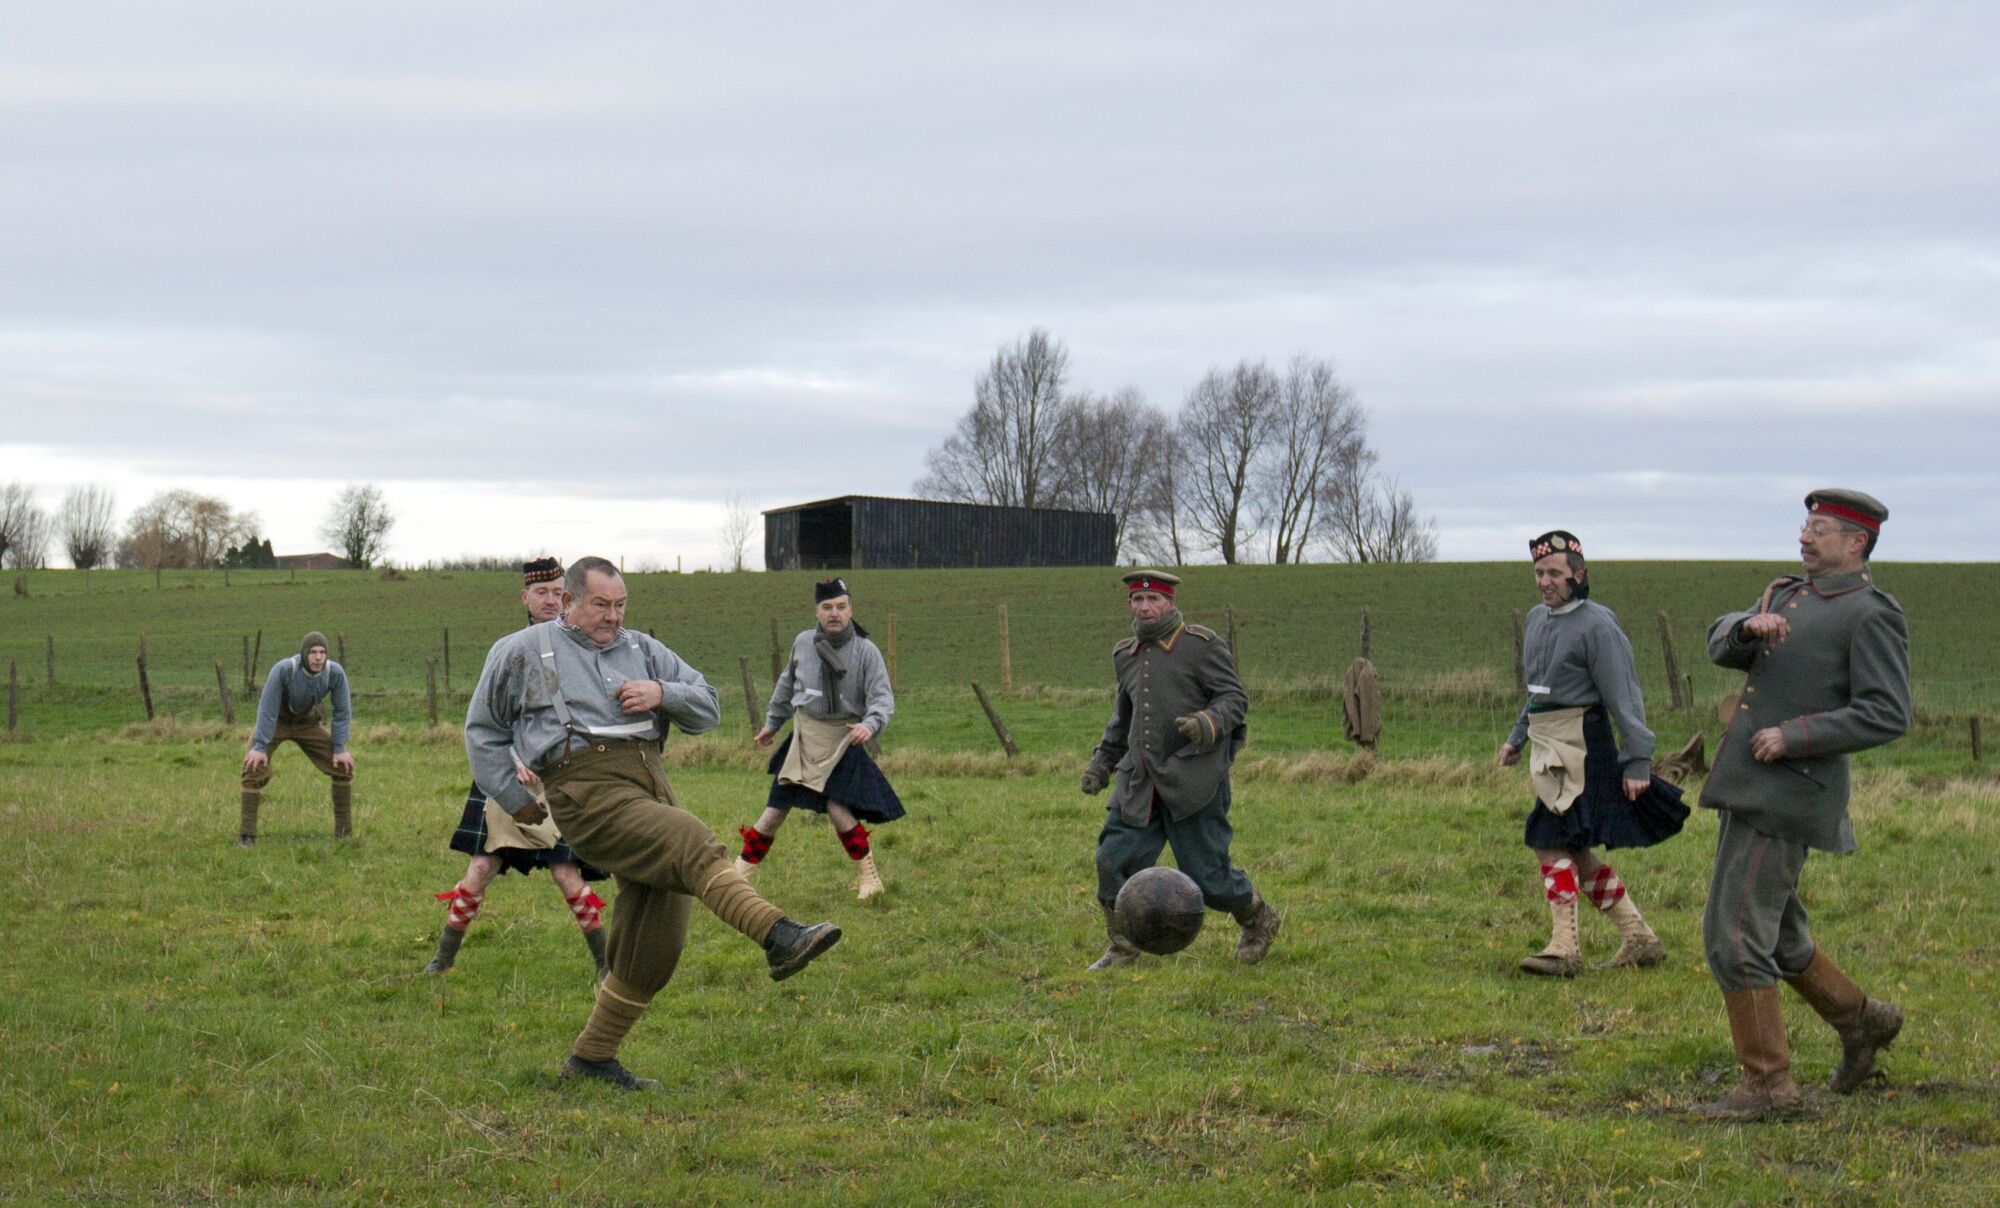 Reenactors are dressed in World War I British and German uniforms as they kick around a soccer ball 